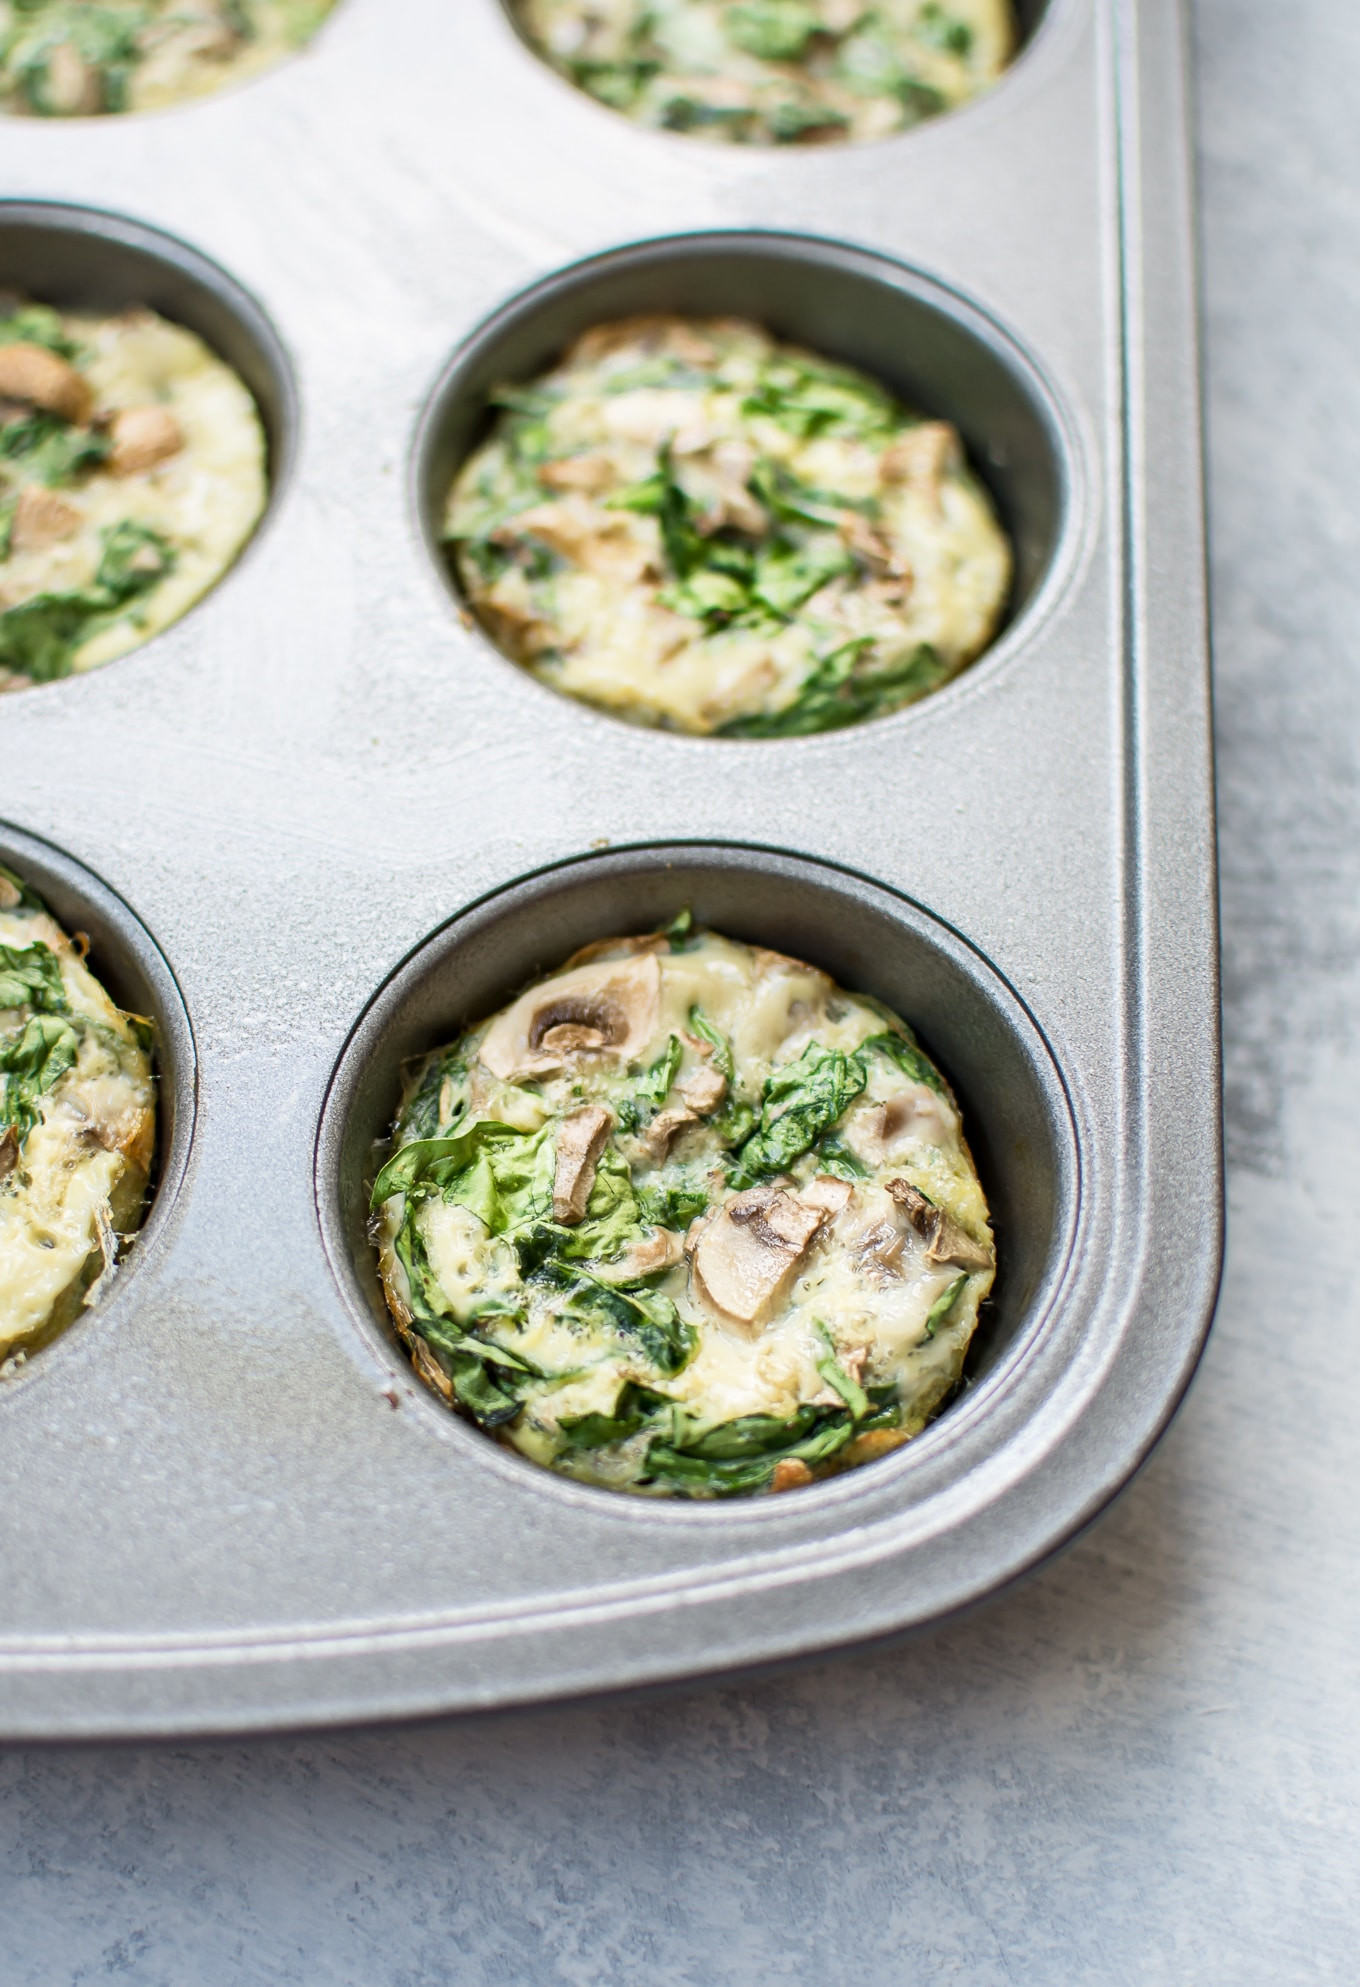 Healthy Breakfast Egg Muffins With Spinach
 Spinach and Mushroom Healthy Breakfast Egg Muffins • Salt